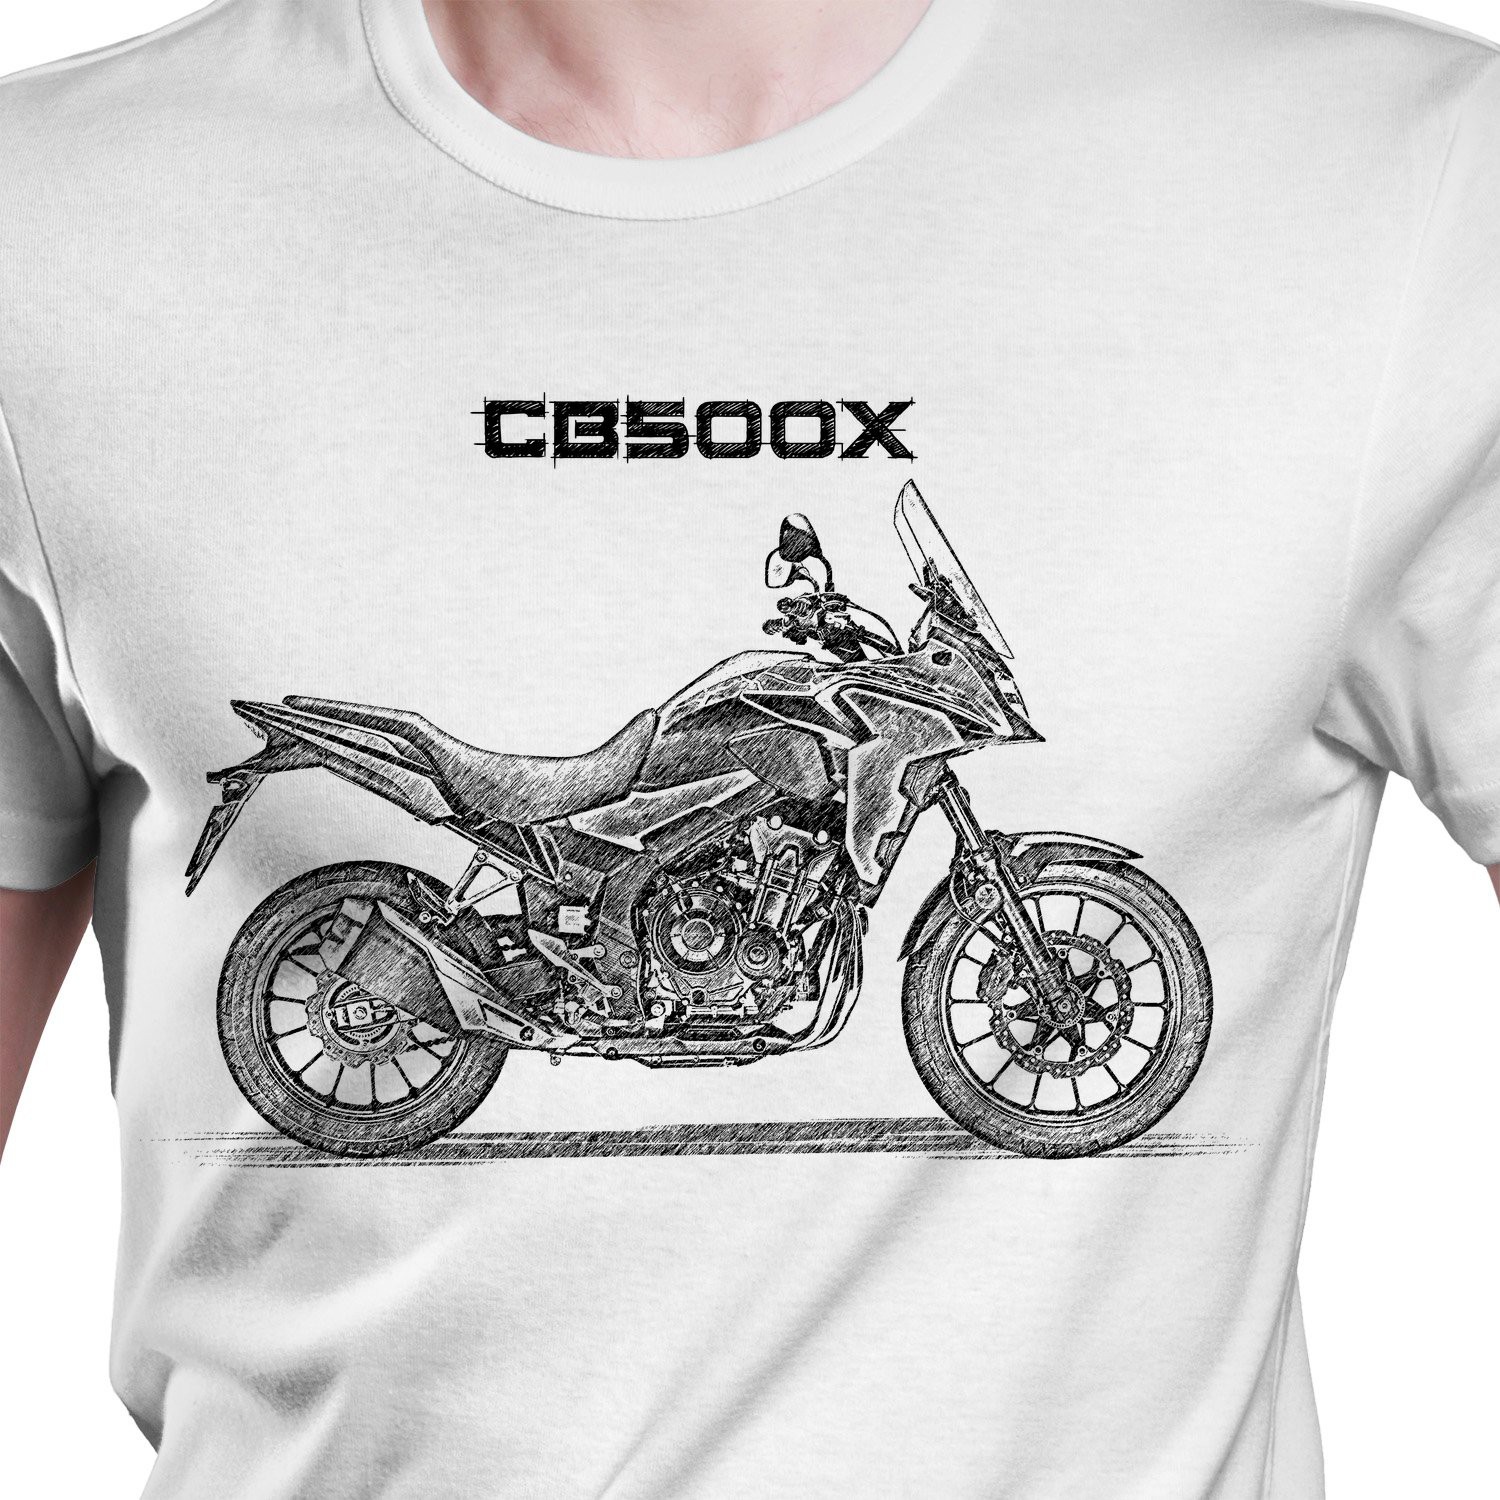 White T-shirt with Honda CB500x. Gift for motorcyclist.